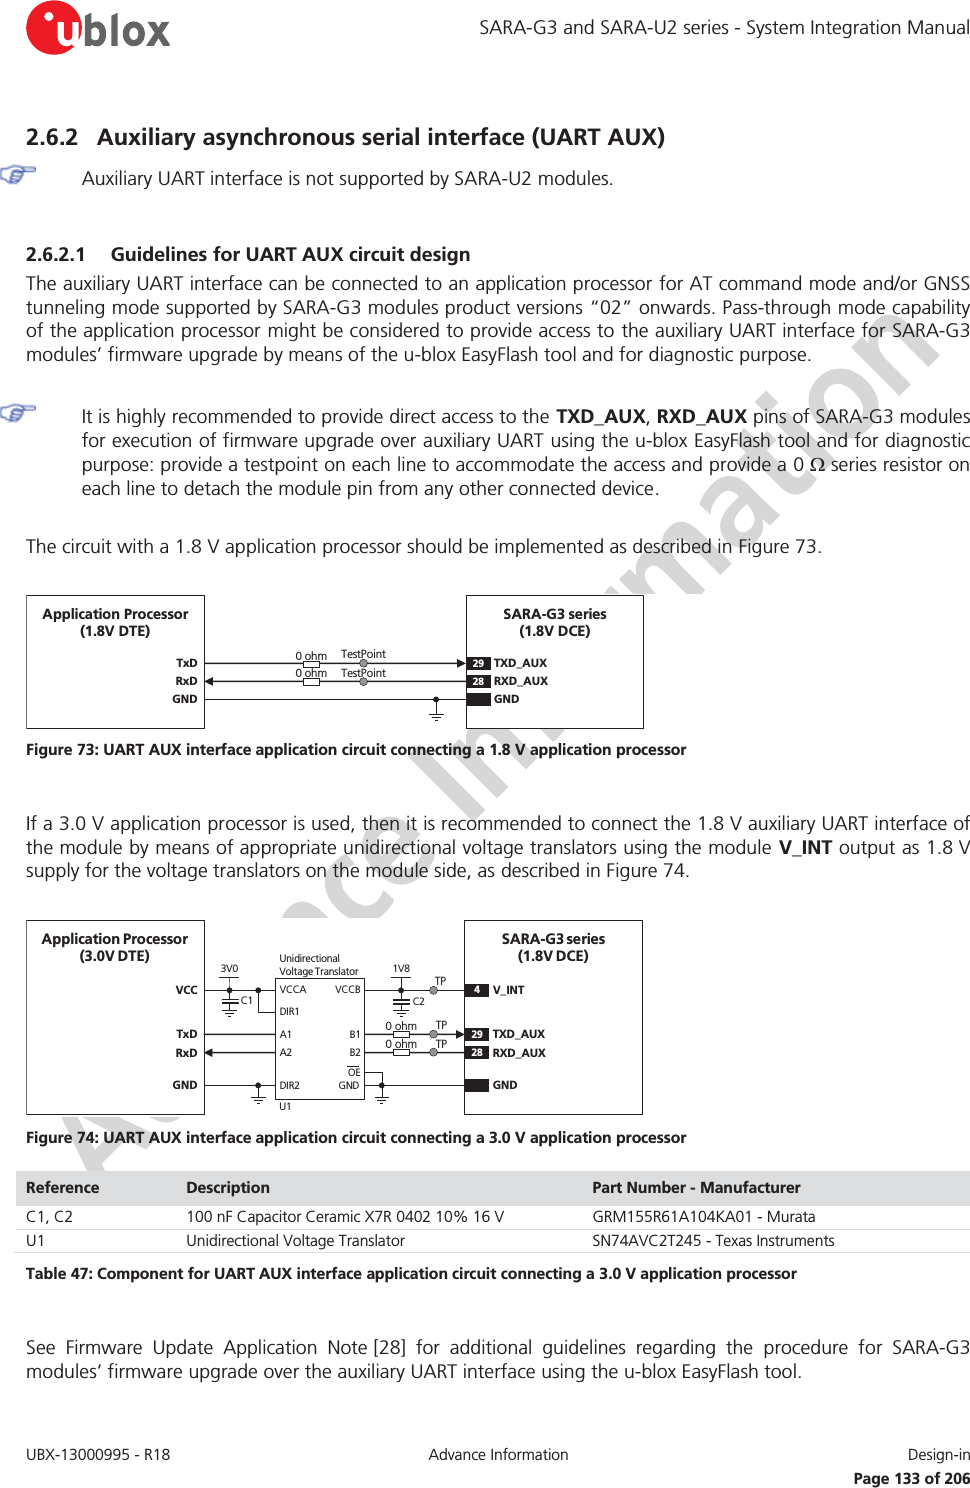 SARA-G3 and SARA-U2 series - System Integration Manual UBX-13000995 - R18  Advance Information  Design-in   Page 133 of 206 2.6.2 Auxiliary asynchronous serial interface (UART AUX)  Auxiliary UART interface is not supported by SARA-U2 modules.  2.6.2.1 Guidelines for UART AUX circuit design The auxiliary UART interface can be connected to an application processor for AT command mode and/or GNSS tunneling mode supported by SARA-G3 modules product versions “02” onwards. Pass-through mode capability of the application processor might be considered to provide access to the auxiliary UART interface for SARA-G3 modules’ firmware upgrade by means of the u-blox EasyFlash tool and for diagnostic purpose.   It is highly recommended to provide direct access to the TXD_AUX, RXD_AUX pins of SARA-G3 modules for execution of firmware upgrade over auxiliary UART using the u-blox EasyFlash tool and for diagnostic purpose: provide a testpoint on each line to accommodate the access and provide a 0 : series resistor on each line to detach the module pin from any other connected device.  The circuit with a 1.8 V application processor should be implemented as described in Figure 73.  TxDApplication Processor(1.8V DTE)RxDSARA-G3 series (1.8V DCE)29TXD_AUX28RXD_AUXGND GND0 ohm0 ohmTestPointTestPoint Figure 73: UART AUX interface application circuit connecting a 1.8 V application processor  If a 3.0 V application processor is used, then it is recommended to connect the 1.8 V auxiliary UART interface of the module by means of appropriate unidirectional voltage translators using the module V_INT output as 1.8 V supply for the voltage translators on the module side, as described in Figure 74.  4V_INTTxDApplication Processor(3.0V DTE)RxDGNDSARA-G3 series (1.8V DCE)29 TXD_AUX28RXD_AUXGND1V8B1 A1GNDU1VCCBVCCAUnidirectionalVoltage TranslatorC1 C23V0DIR1DIR2OEVCCB2 A20 ohm0 ohmTPTPTP Figure 74: UART AUX interface application circuit connecting a 3.0 V application processor Reference  Description  Part Number - Manufacturer C1, C2 100 nF Capacitor Ceramic X7R 0402 10% 16 V GRM155R61A104KA01 - Murata U1 Unidirectional Voltage Translator SN74AVC2T245 - Texas Instruments Table 47: Component for UART AUX interface application circuit connecting a 3.0 V application processor  See  Firmware Update Application Note [28]  for  additional  guidelines  regarding the procedure for SARA-G3 modules’ firmware upgrade over the auxiliary UART interface using the u-blox EasyFlash tool. 